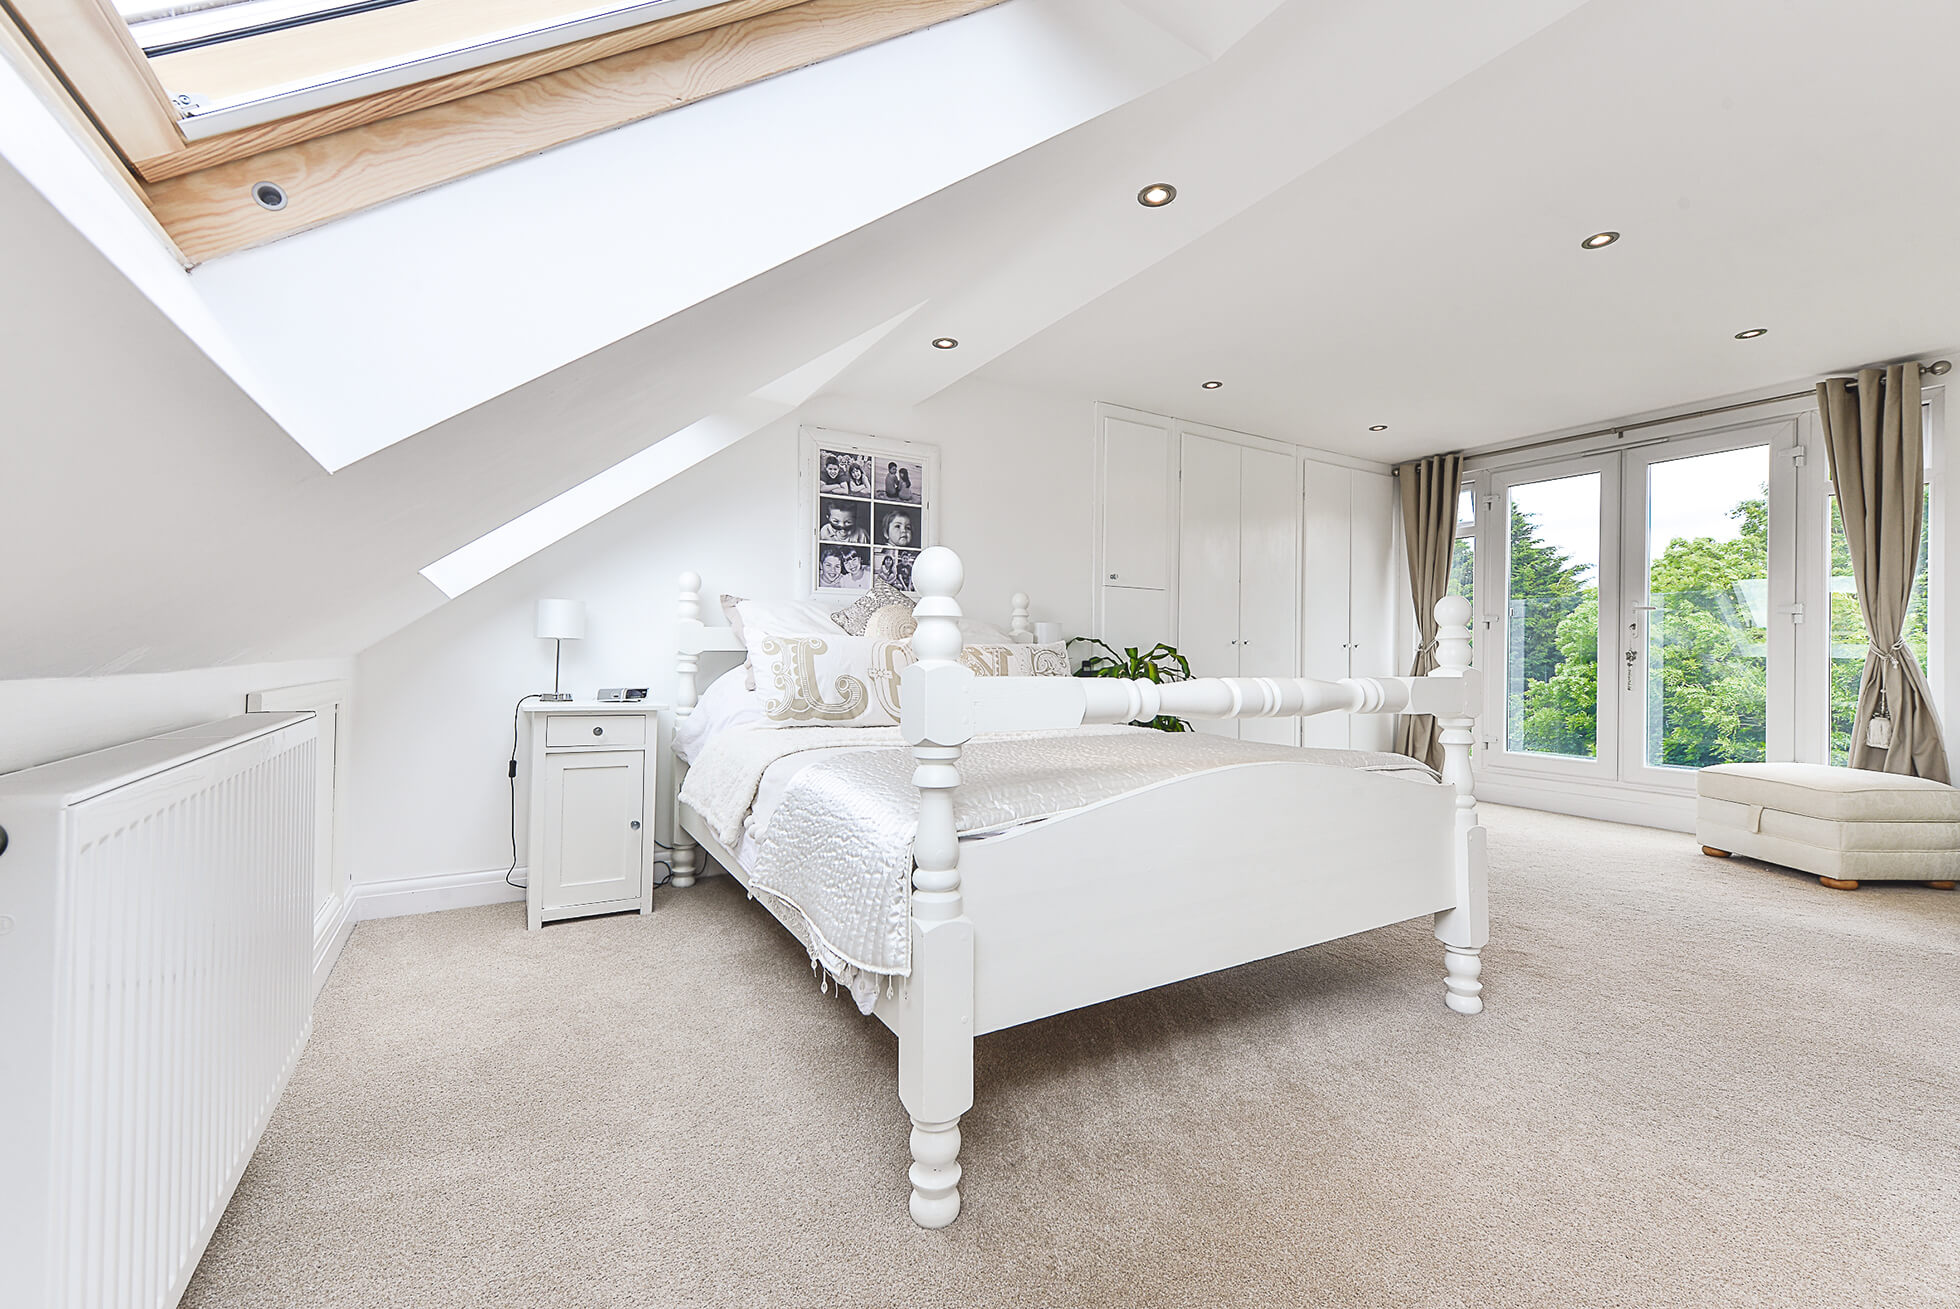 Do you have a question about converting your Loft in Ware? Here are the most popular questions asked by our clients.